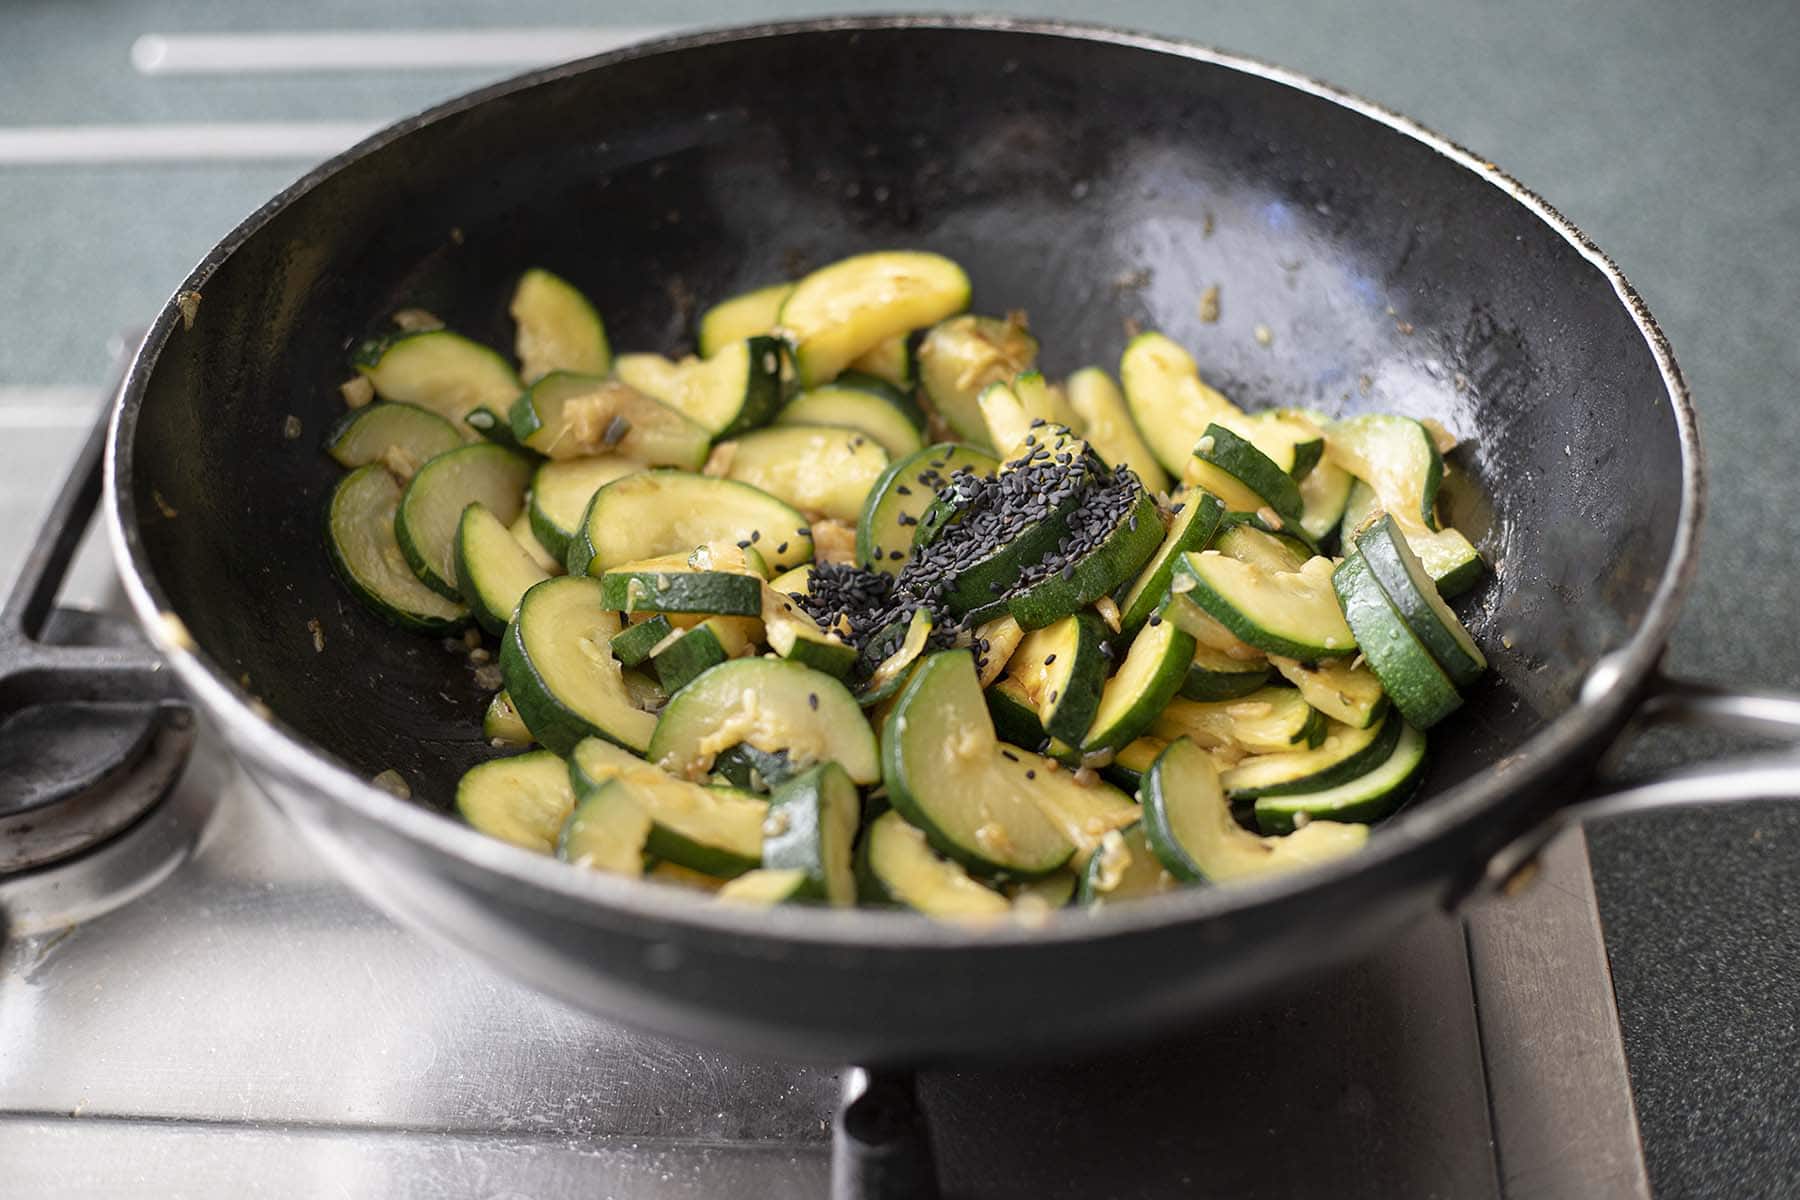 courgettes stir frying in wok